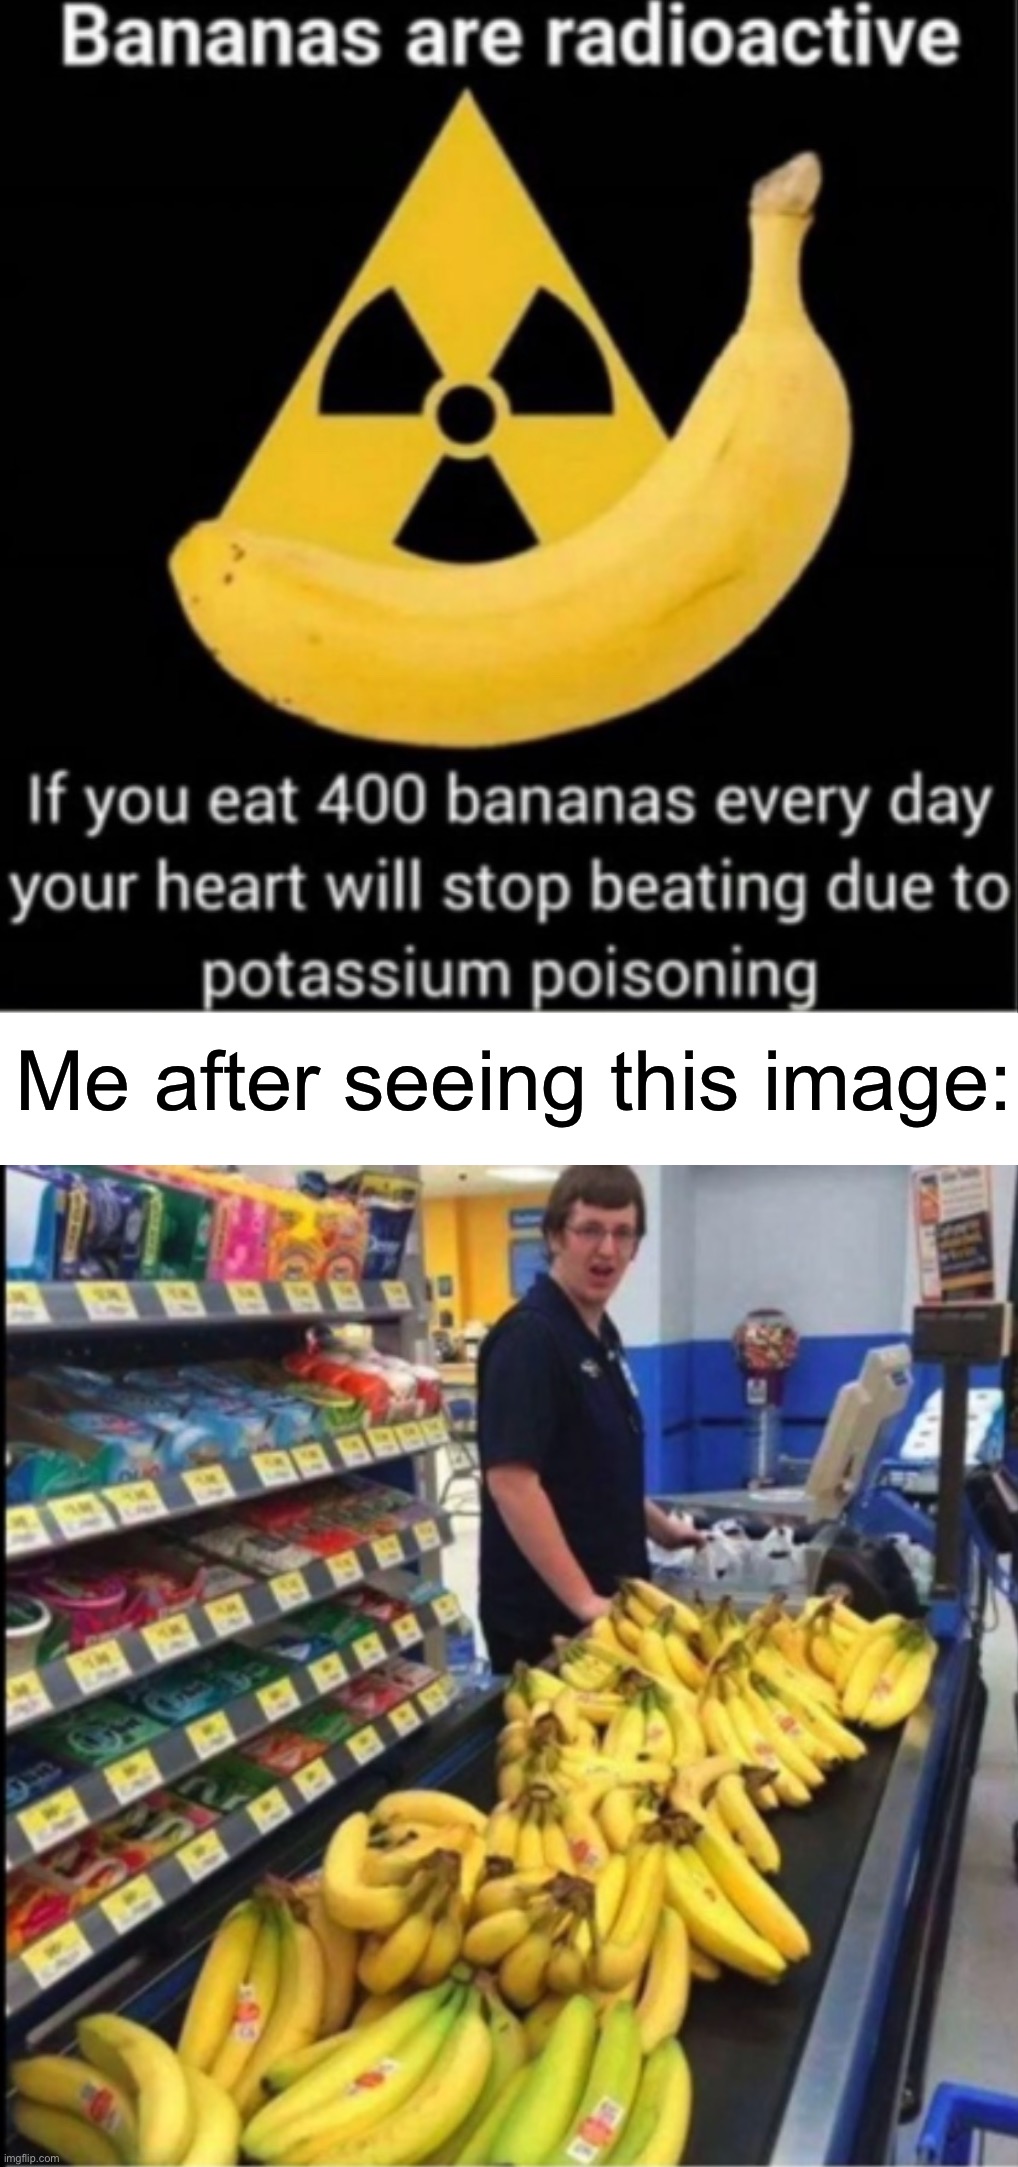 Just like me fr | Me after seeing this image: | image tagged in memes,funny,true story,funny memes,banana,oh no | made w/ Imgflip meme maker